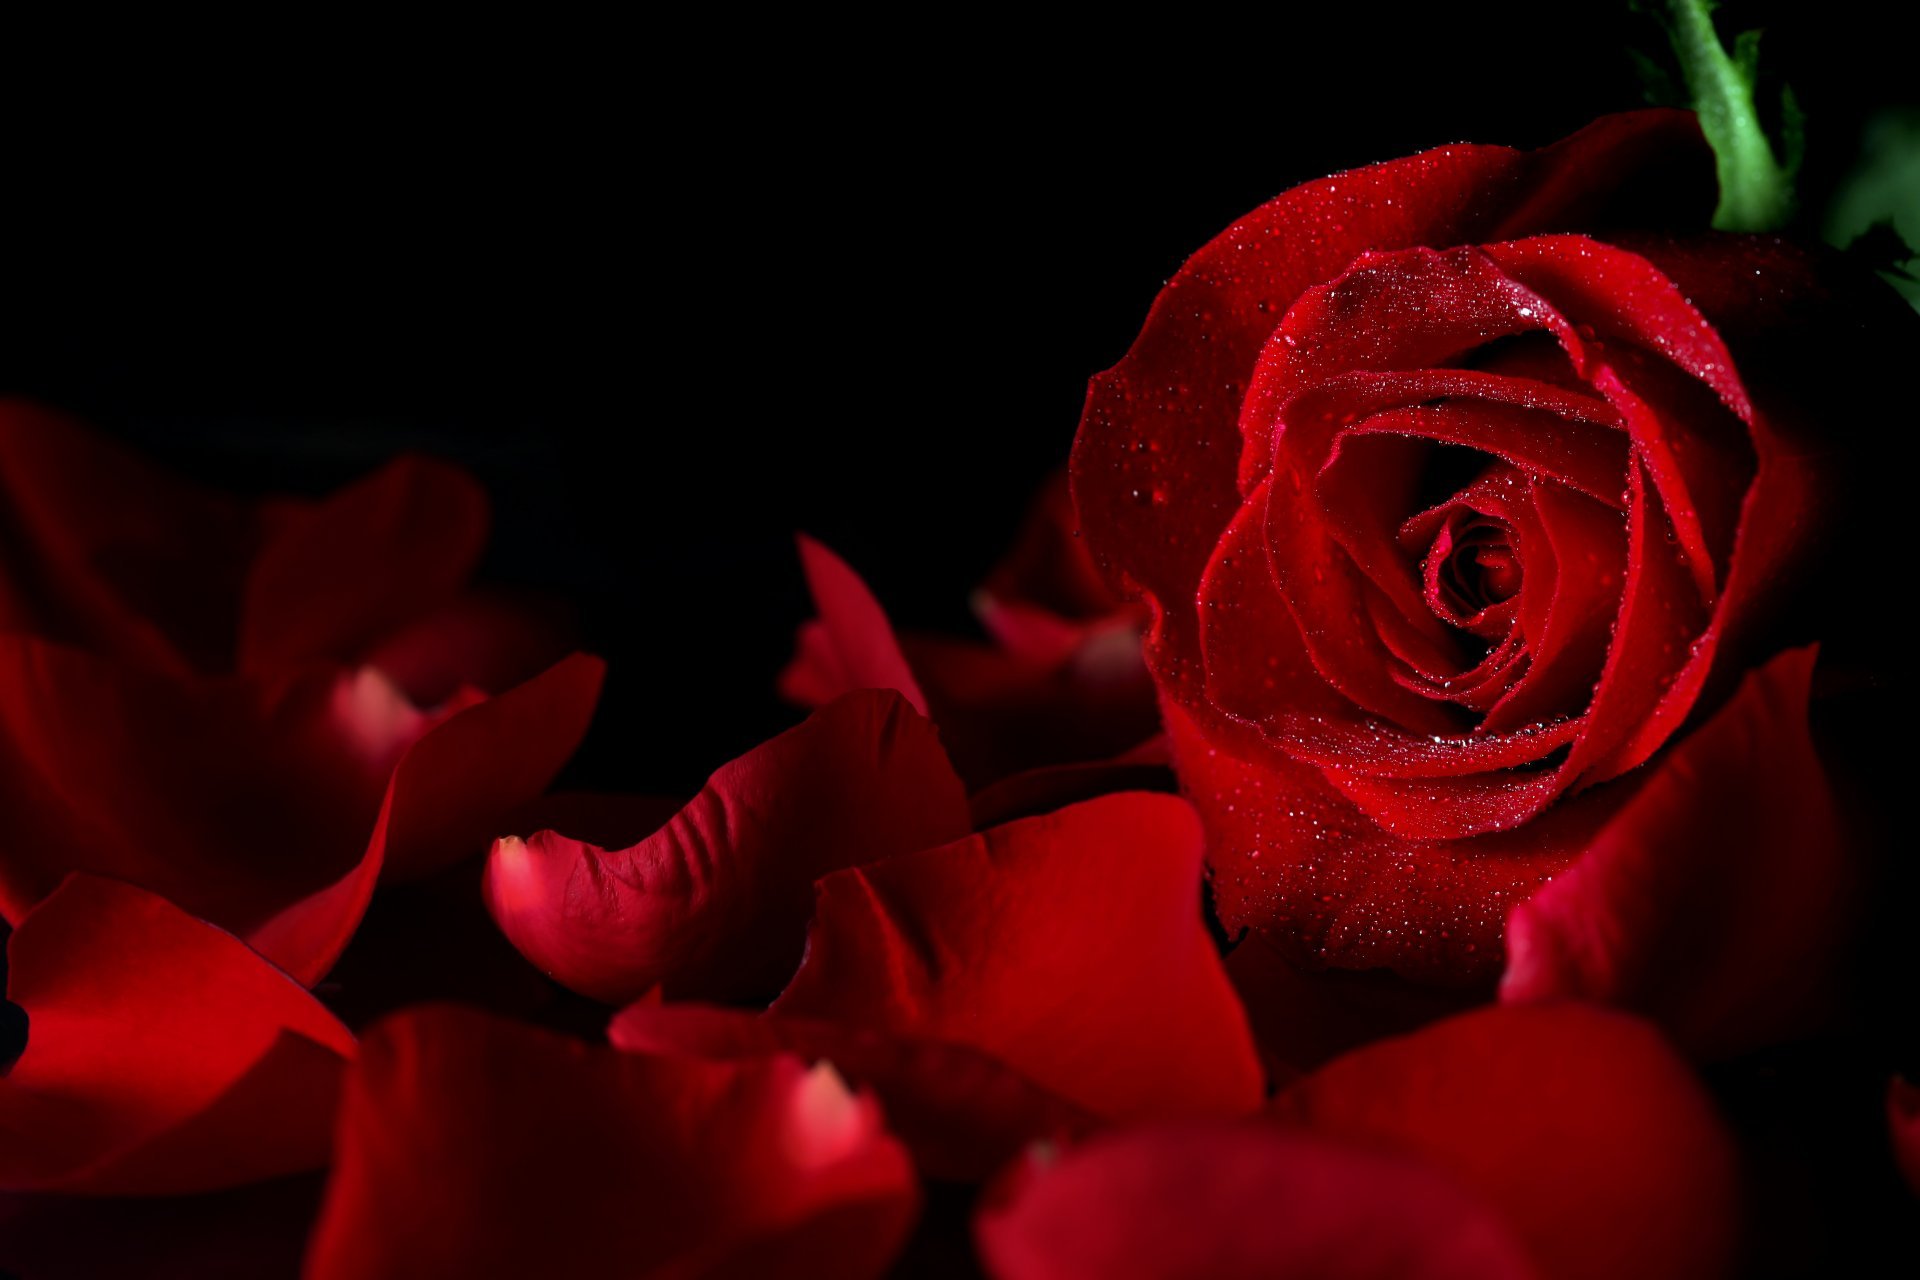 Free download rose red drops bud petals black background flower HD wallpaper [1920x1280] for